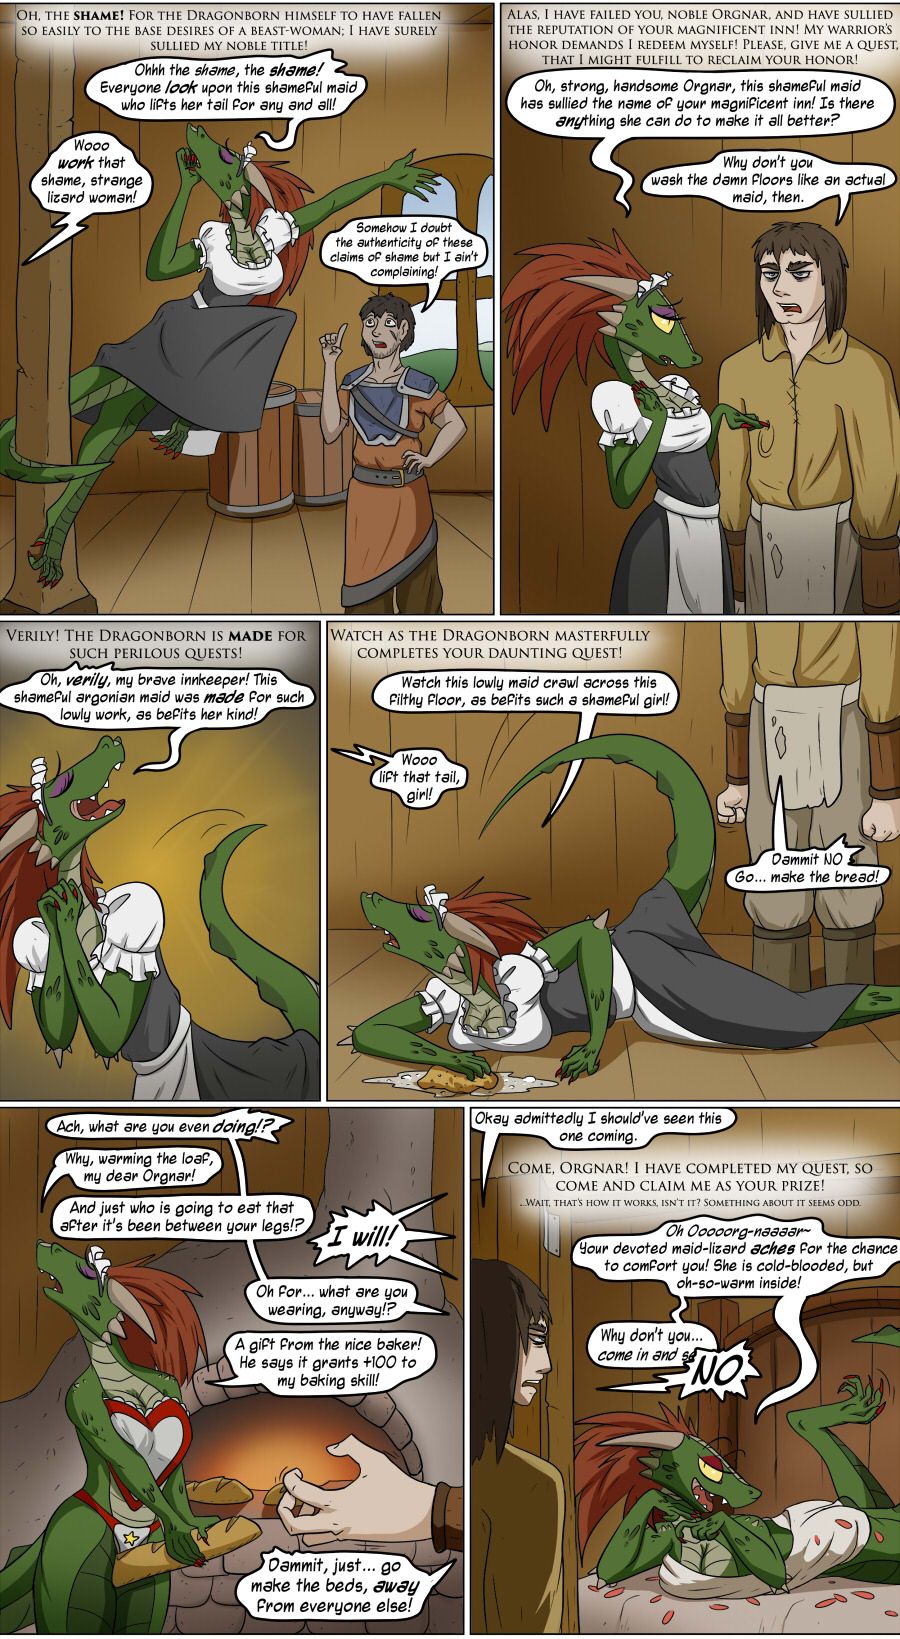 [Valsalia] Lusty Argonian Maid'd [Ongoing] 8